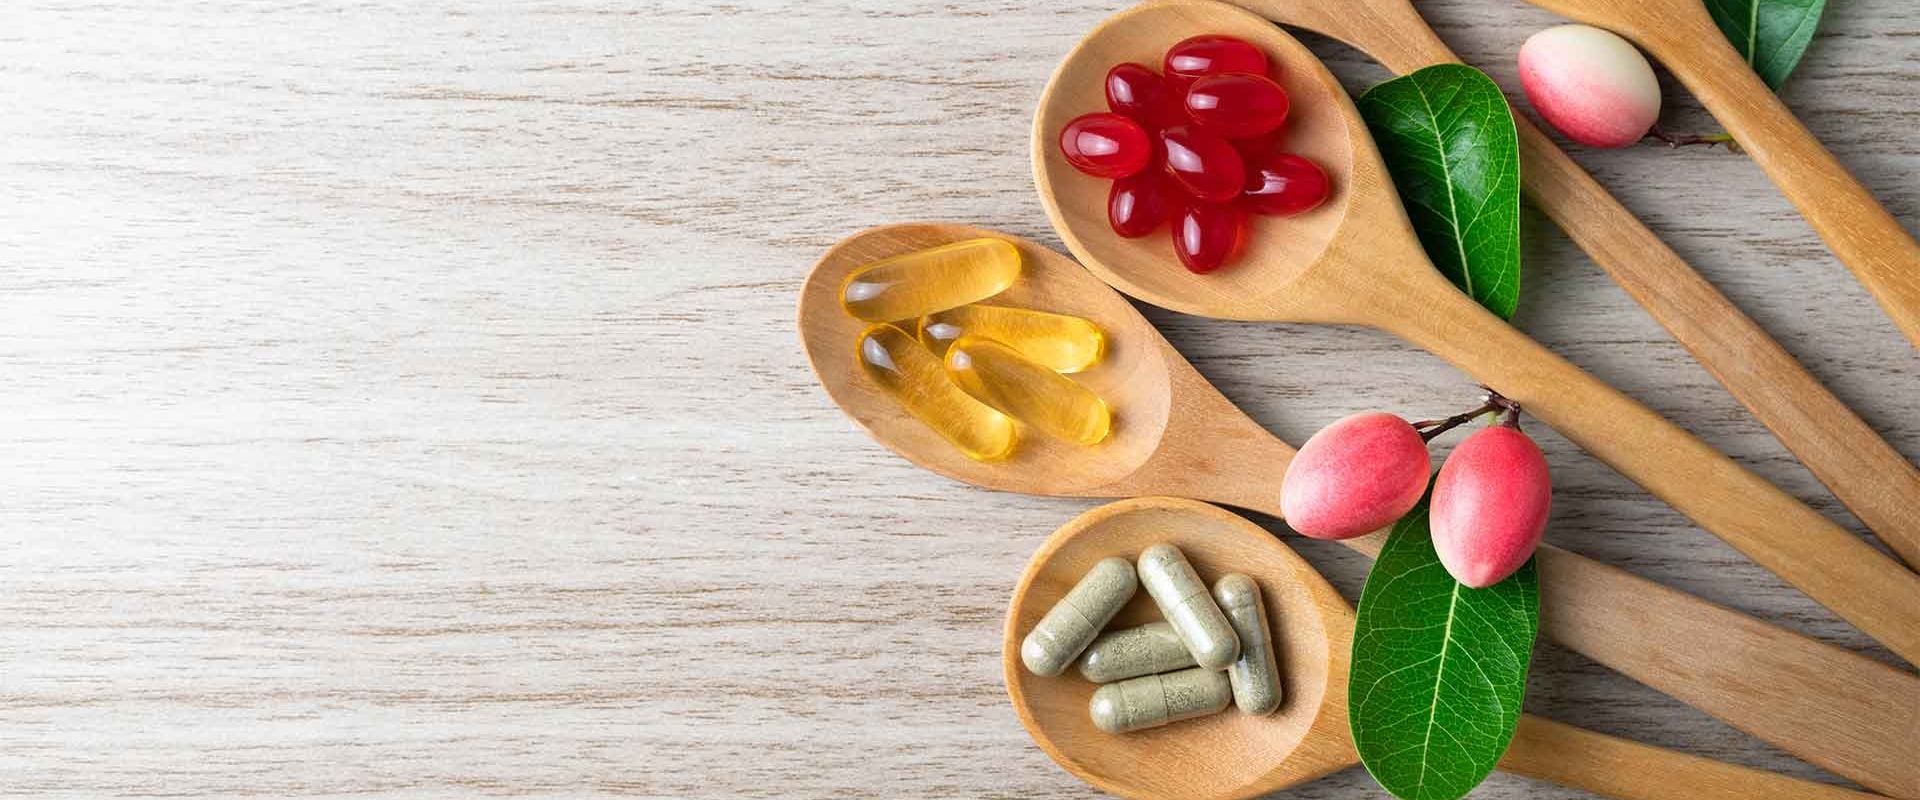 Do Certain Medical Conditions Require Special Vitamin Combinations?